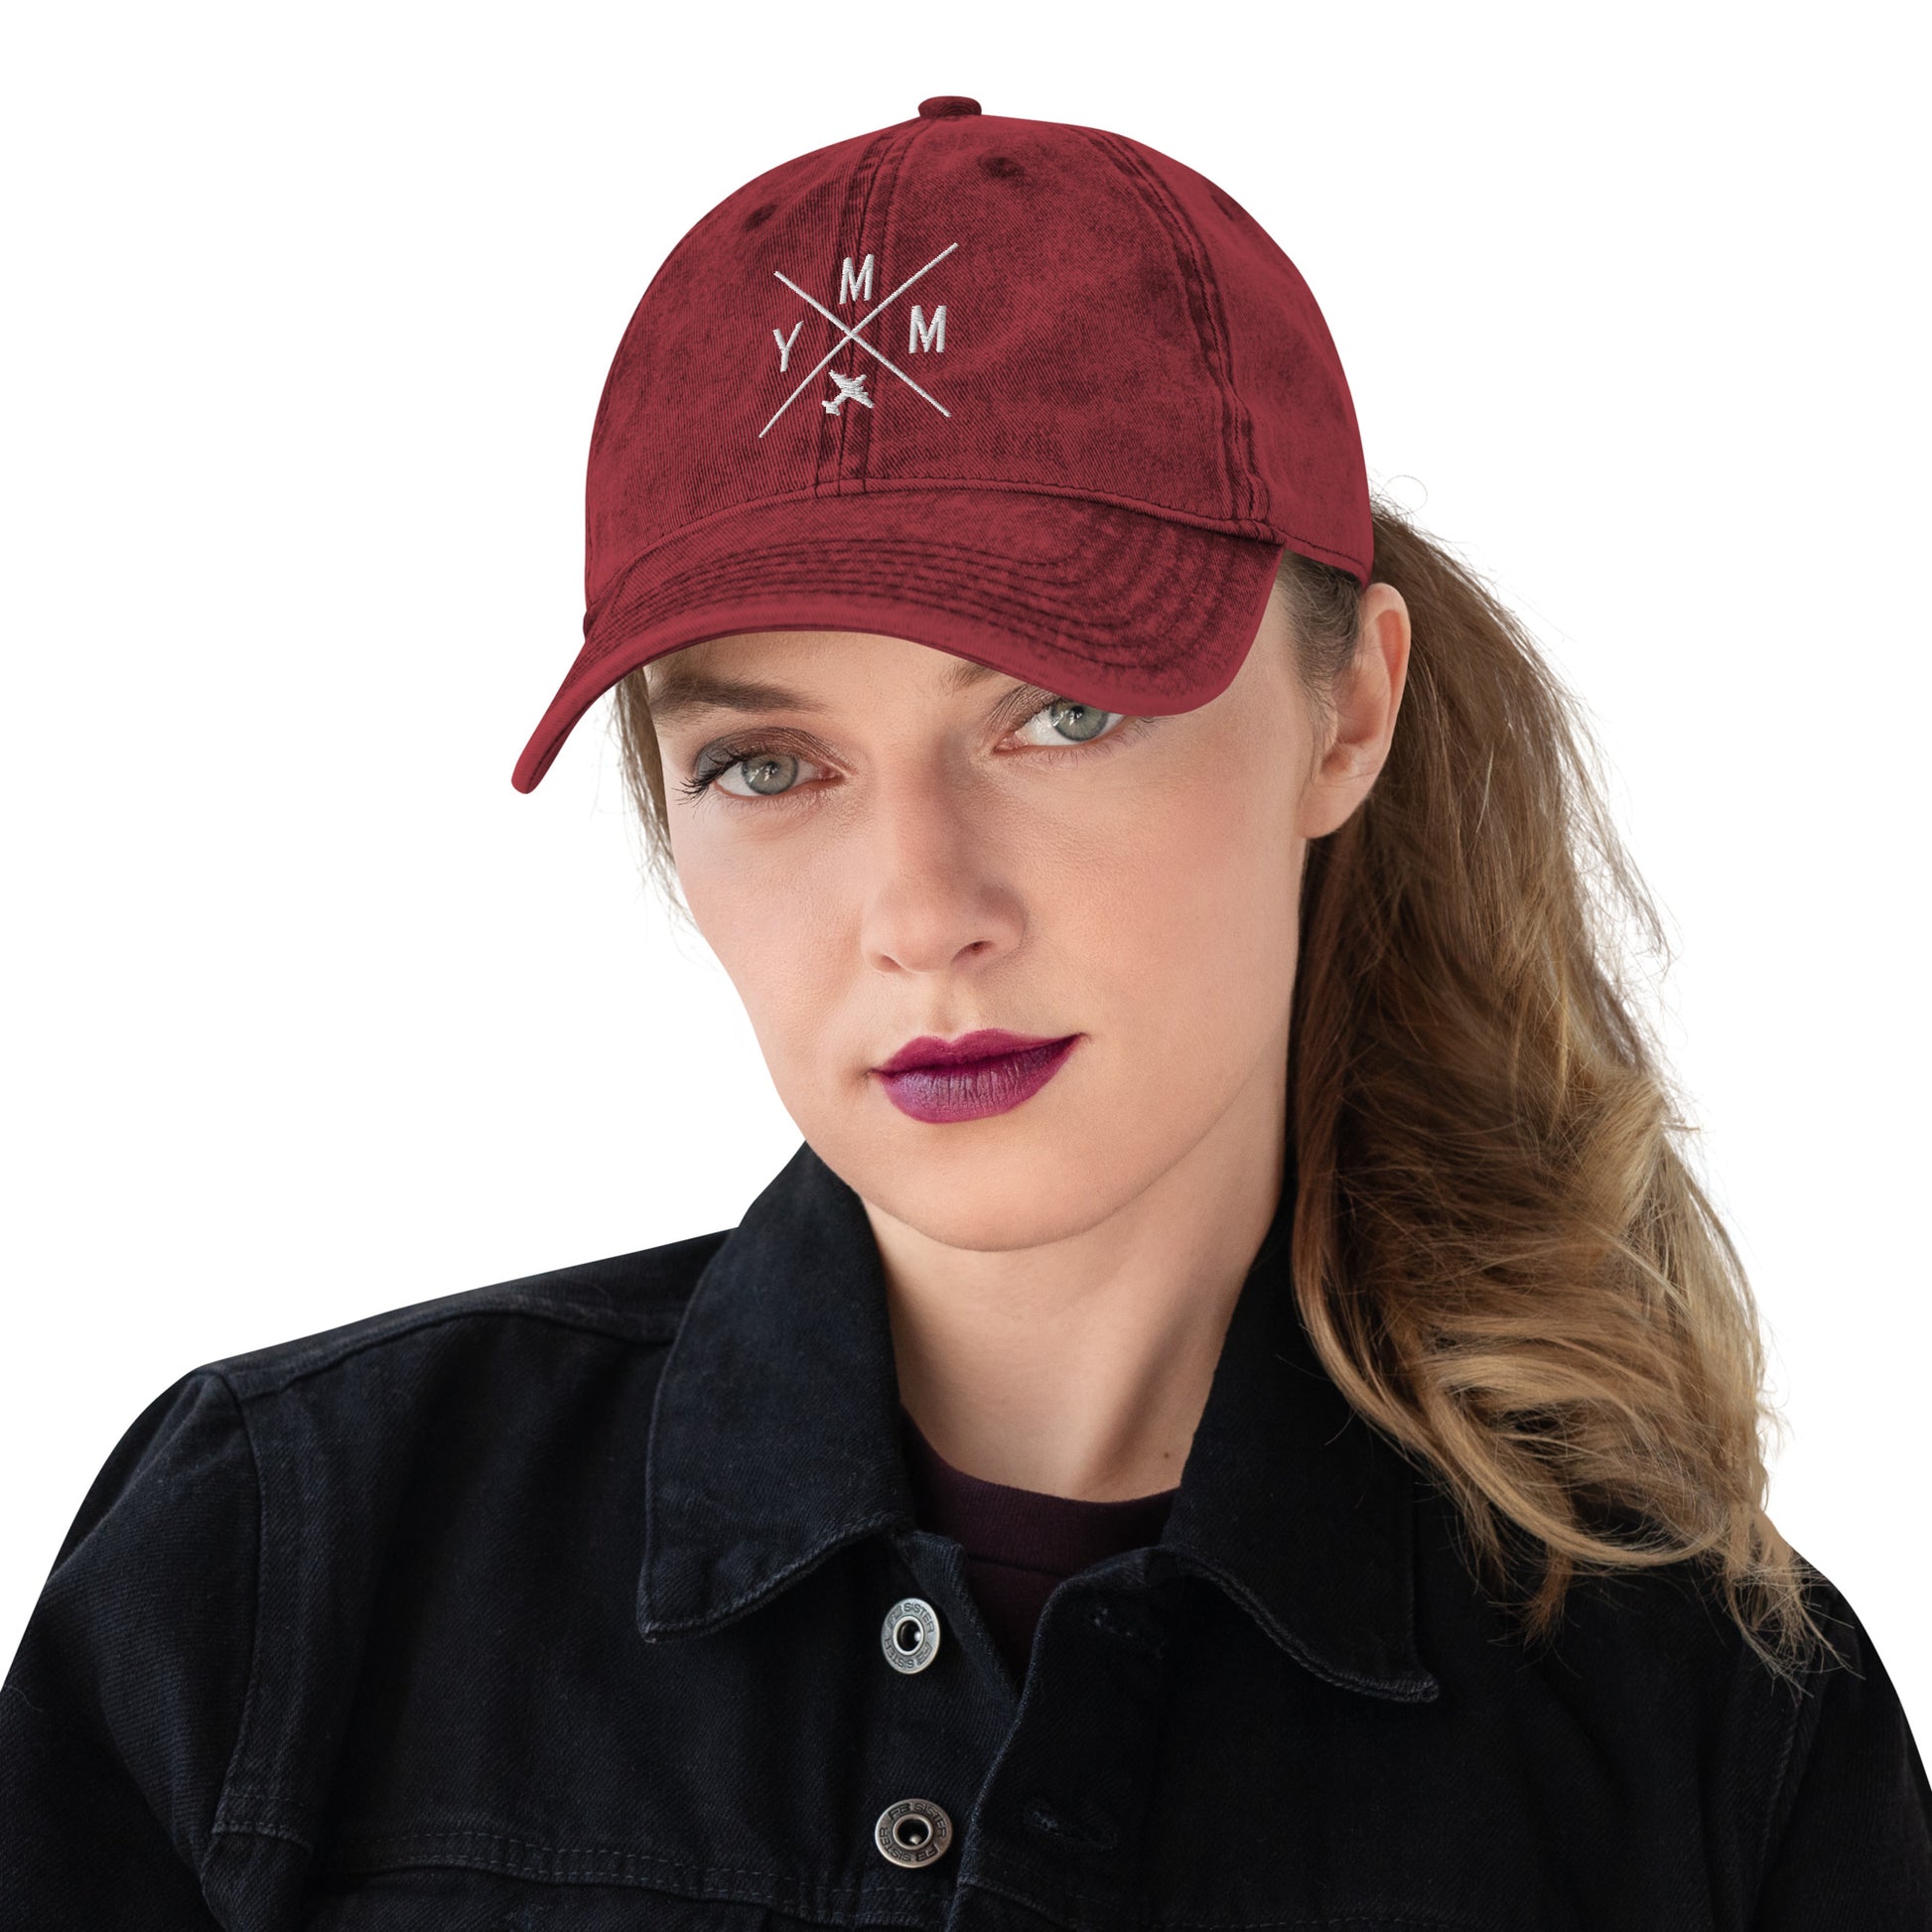 Crossed-X Cotton Twill Cap - White • YMM Fort McMurray • YHM Designs - Image 06